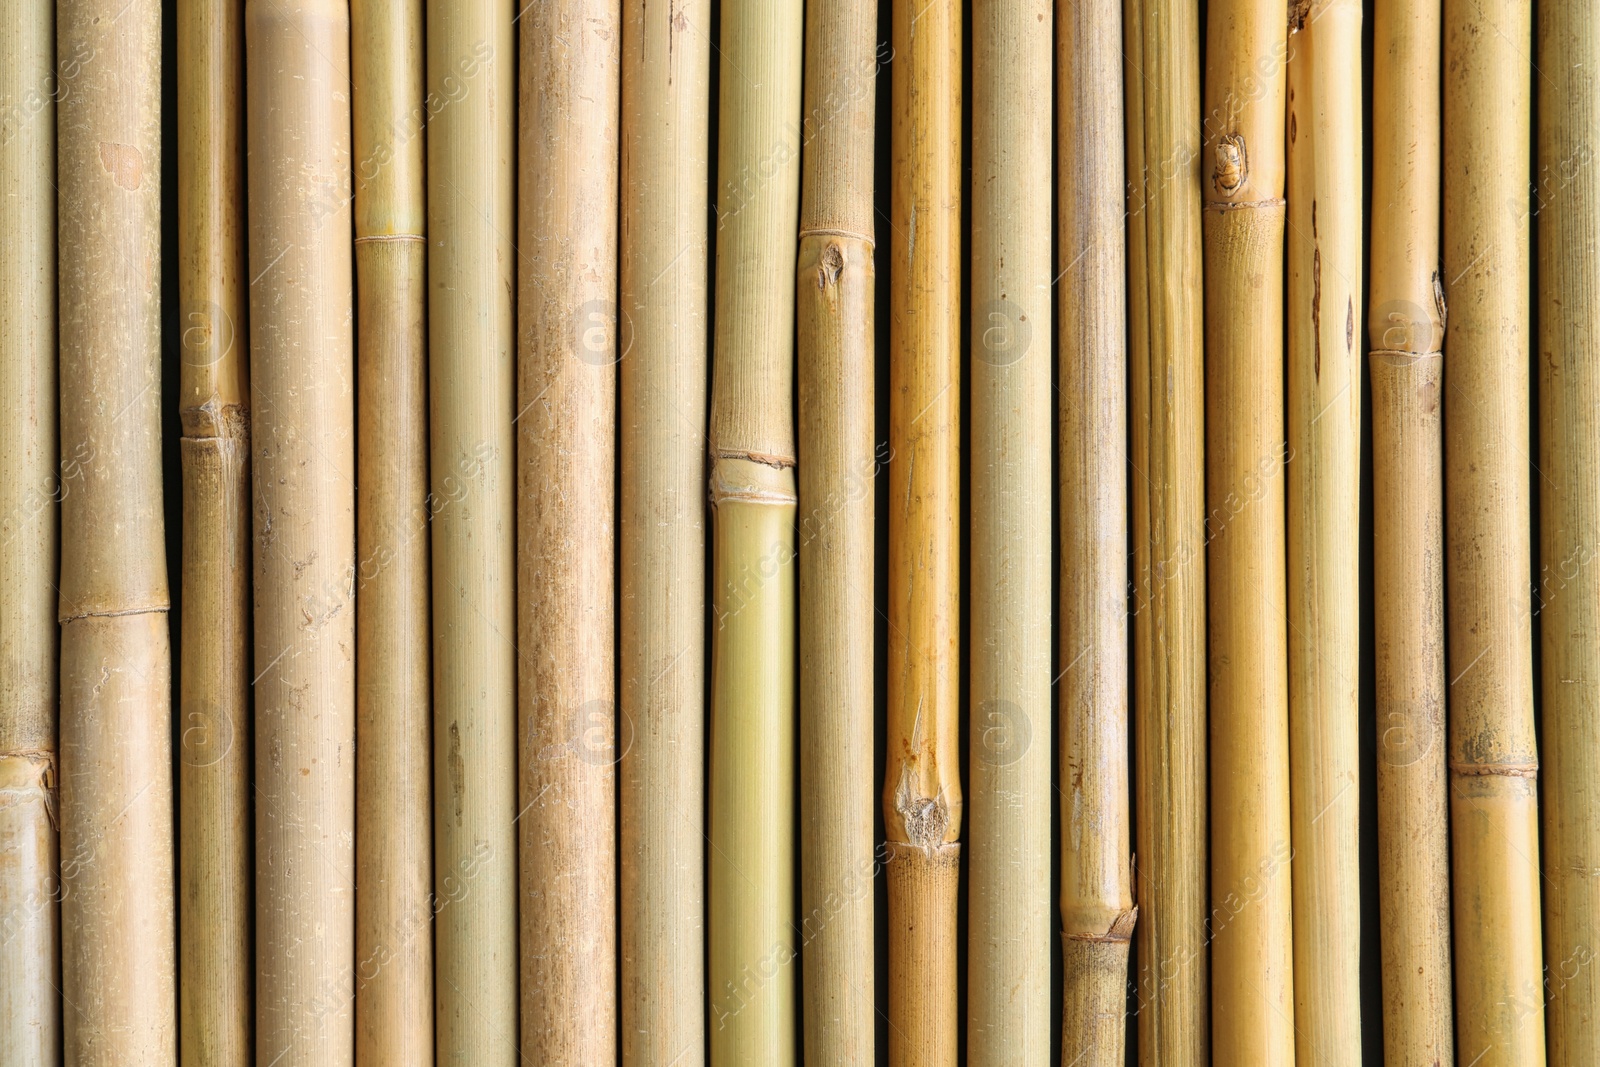 Photo of Dry bamboo sticks as background, top view